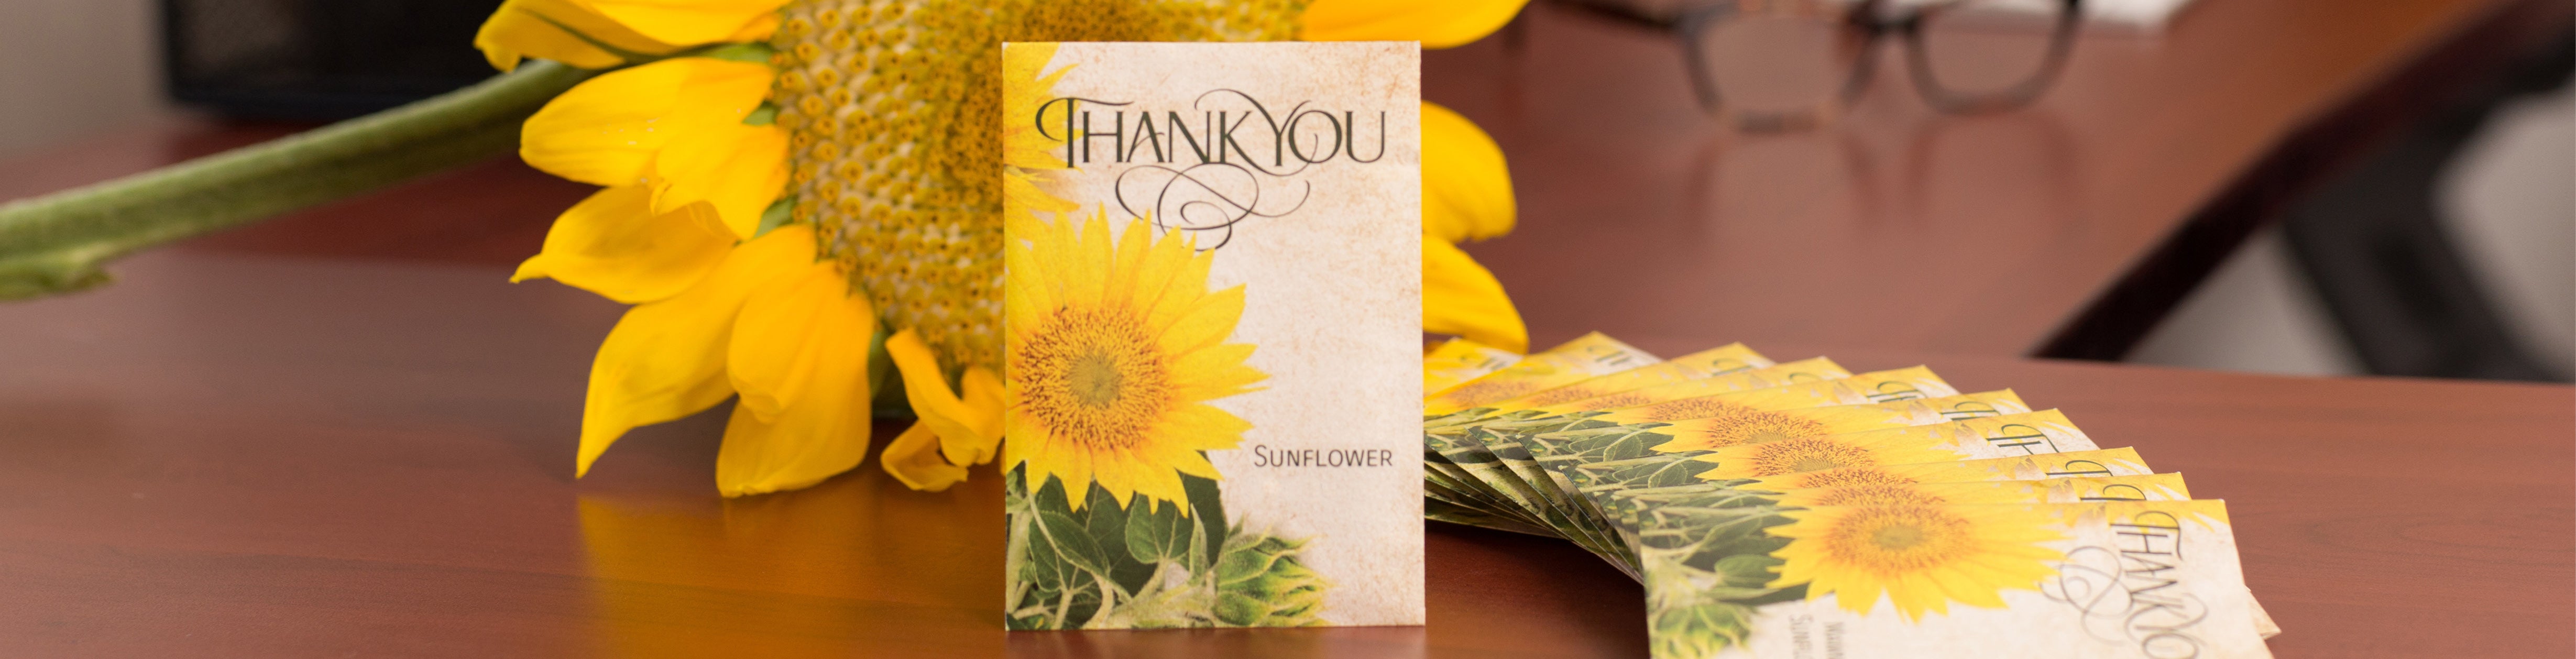 Thank You Sunflower Packet with sunflower at office desk